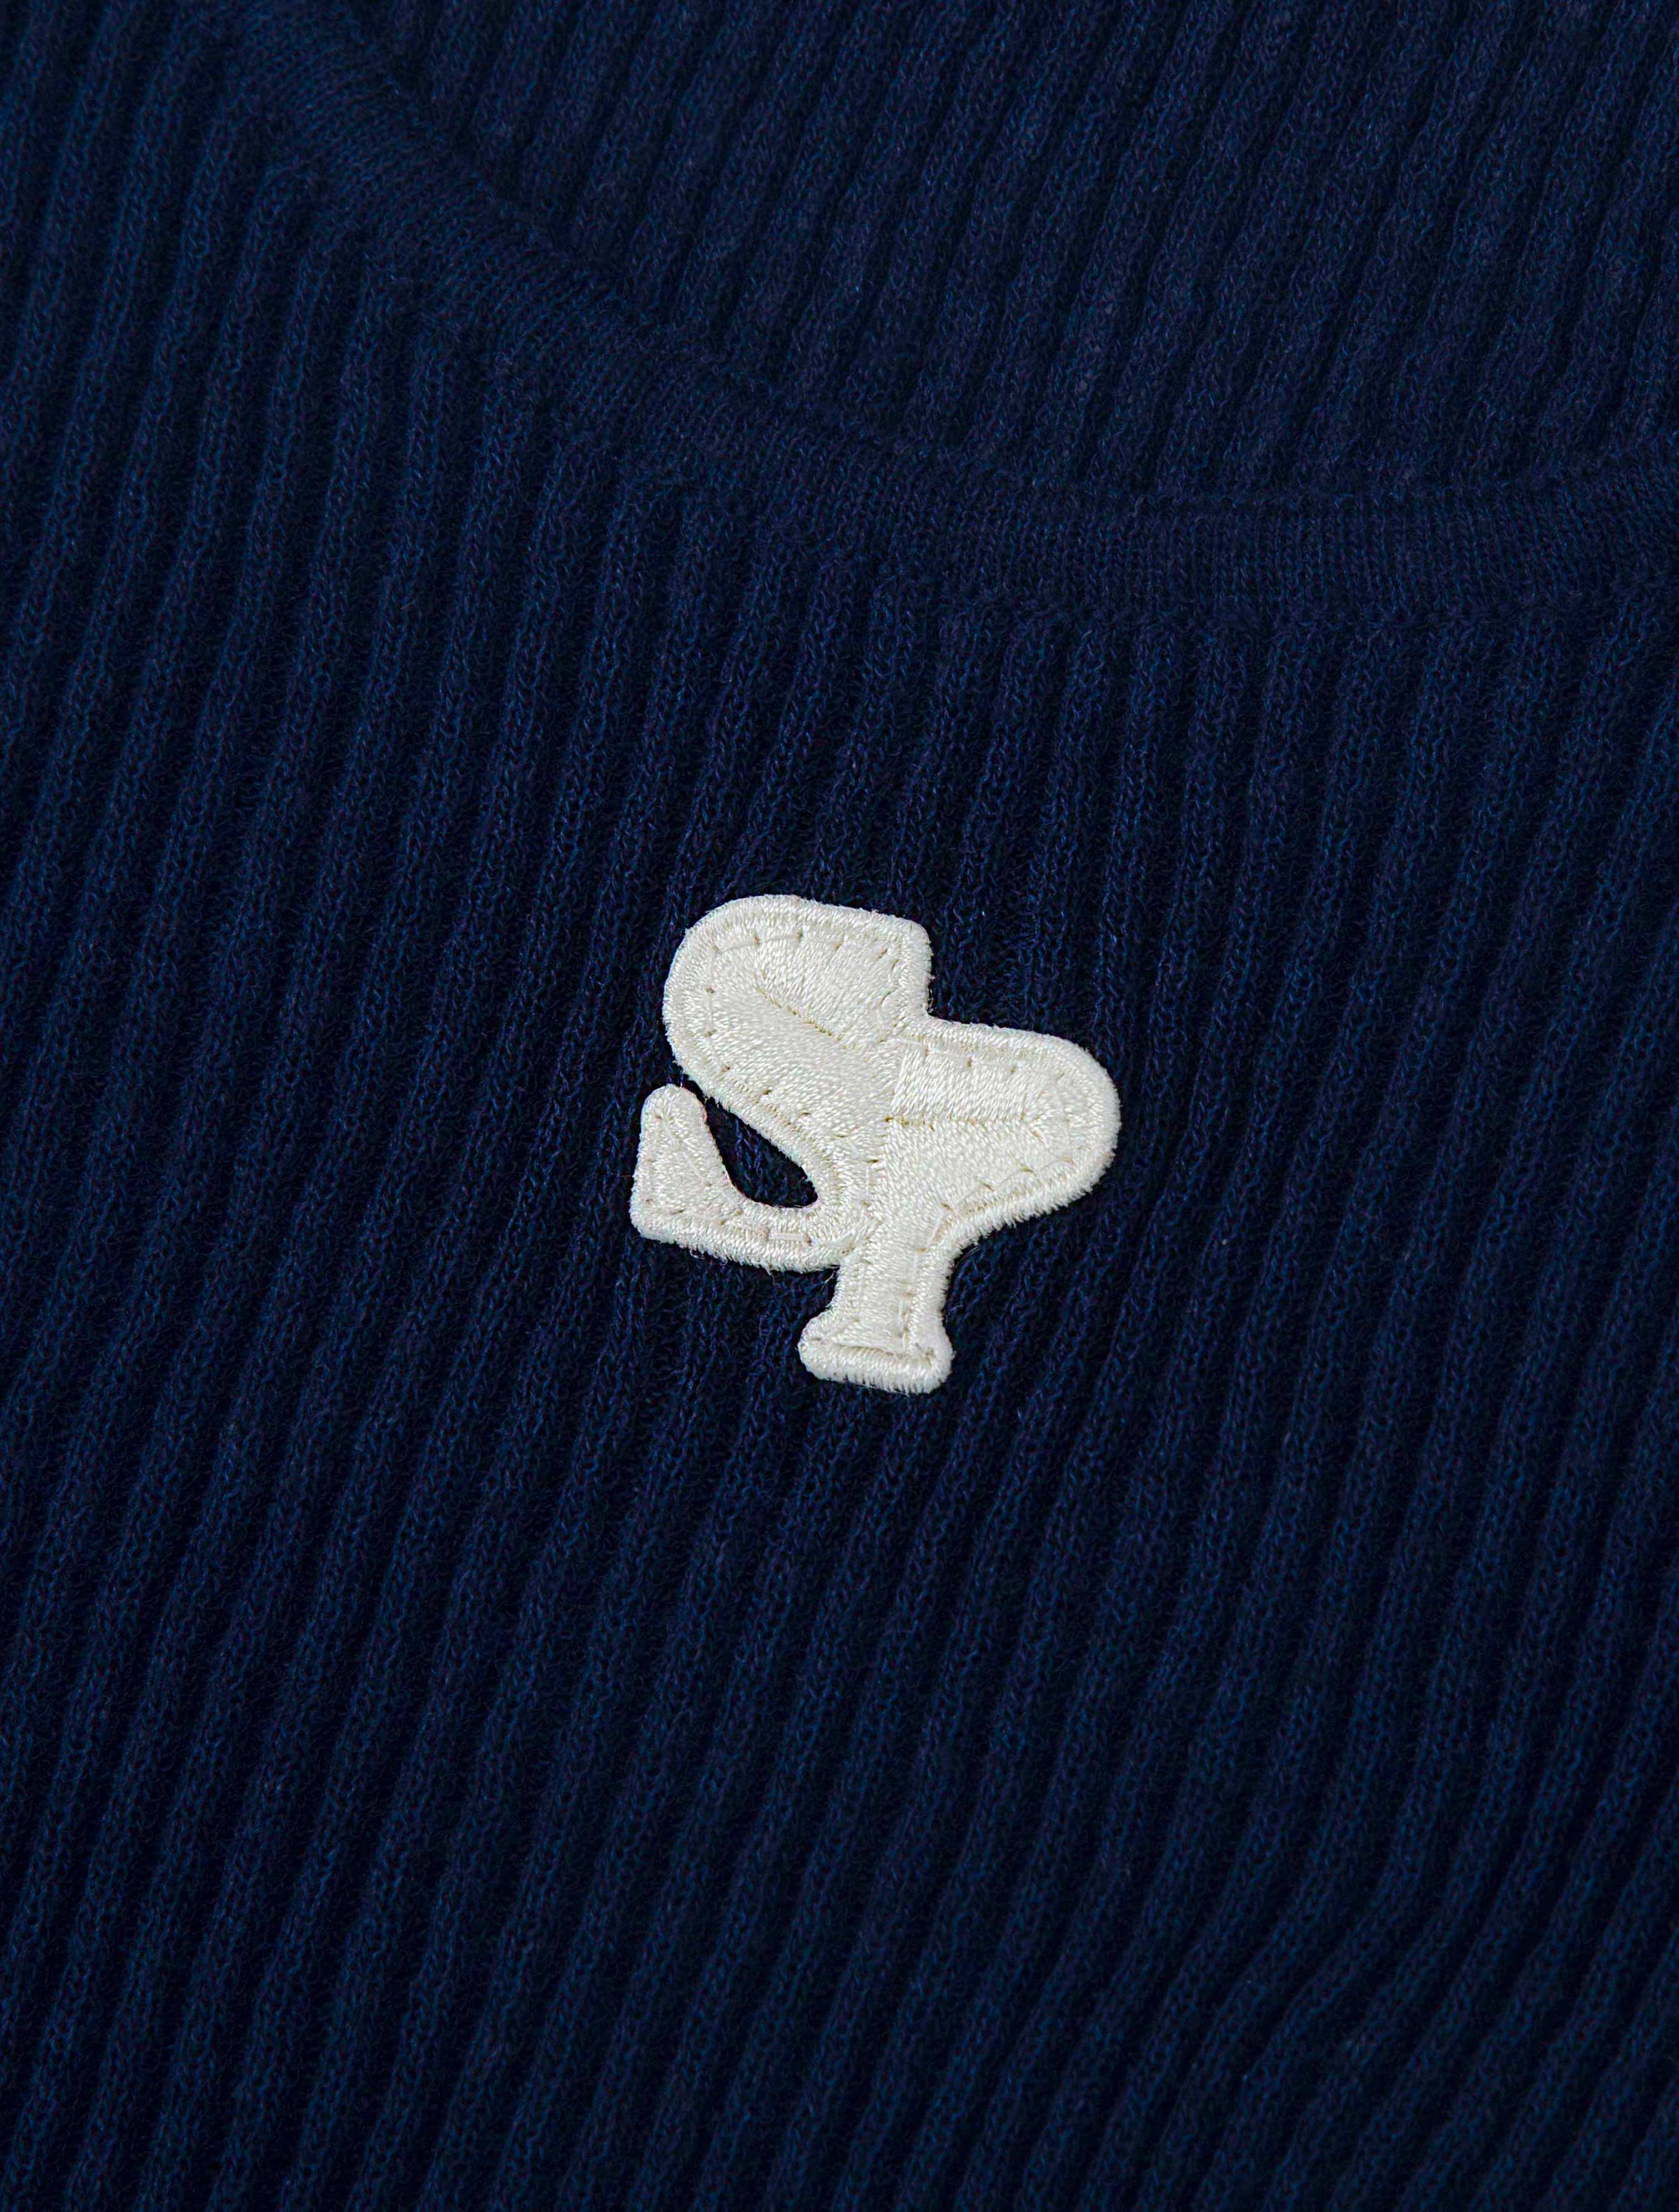 CREW NECK RIBBED KNIT TOP (NAVY)